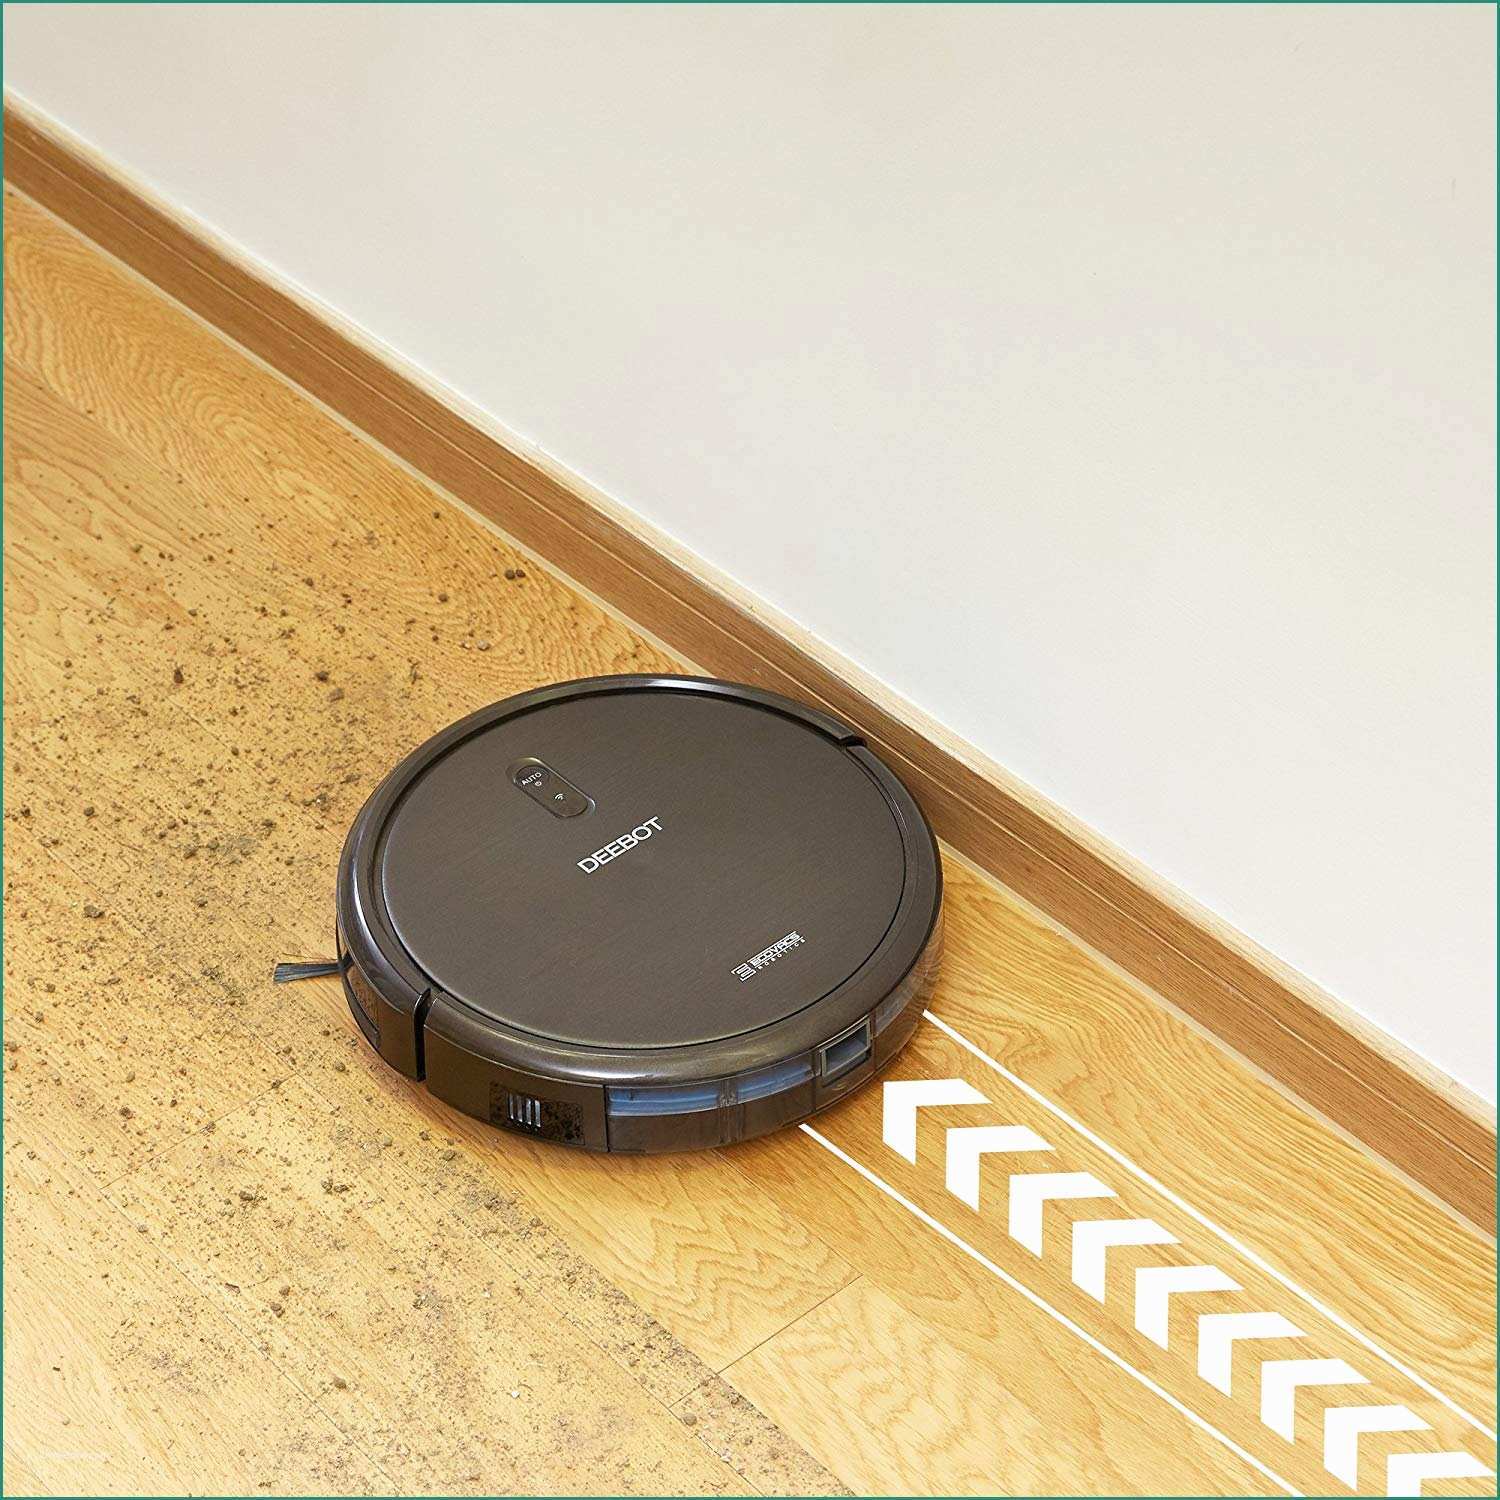 Roomba Recensioni E Amazon Ecovacs Deebot N79s Robot Vacuum Cleaner with Max Power